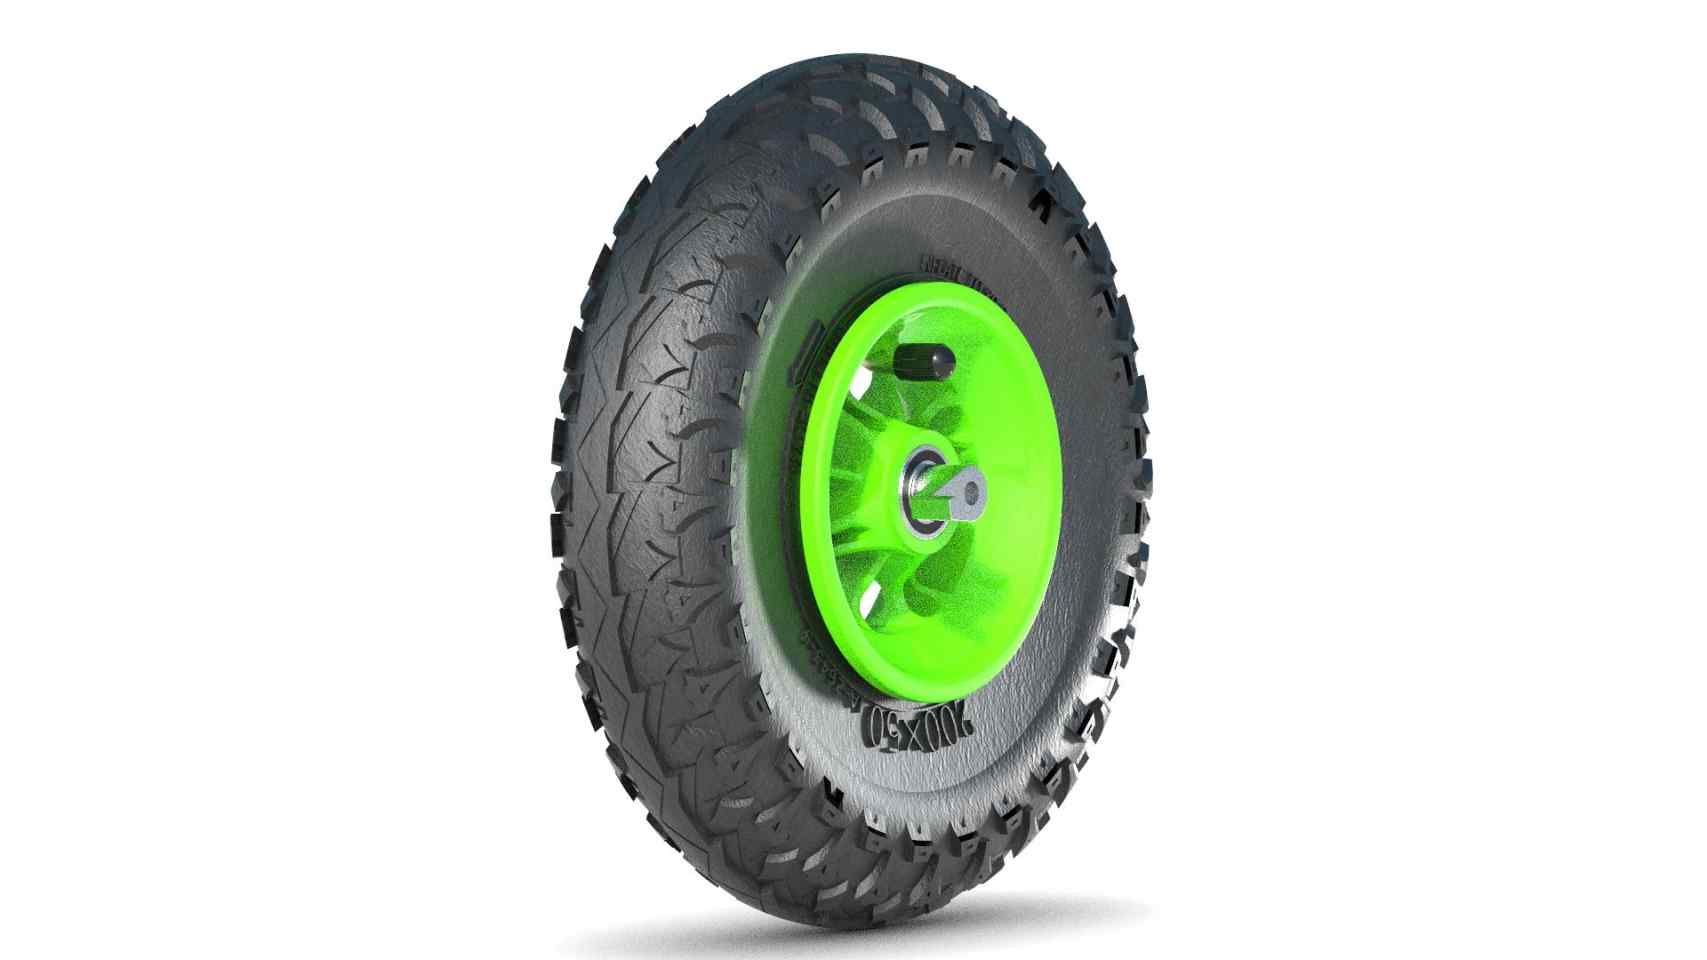 Wheel Green 200mm/8in Reverse - locked Majorgrip - Roll and Pole